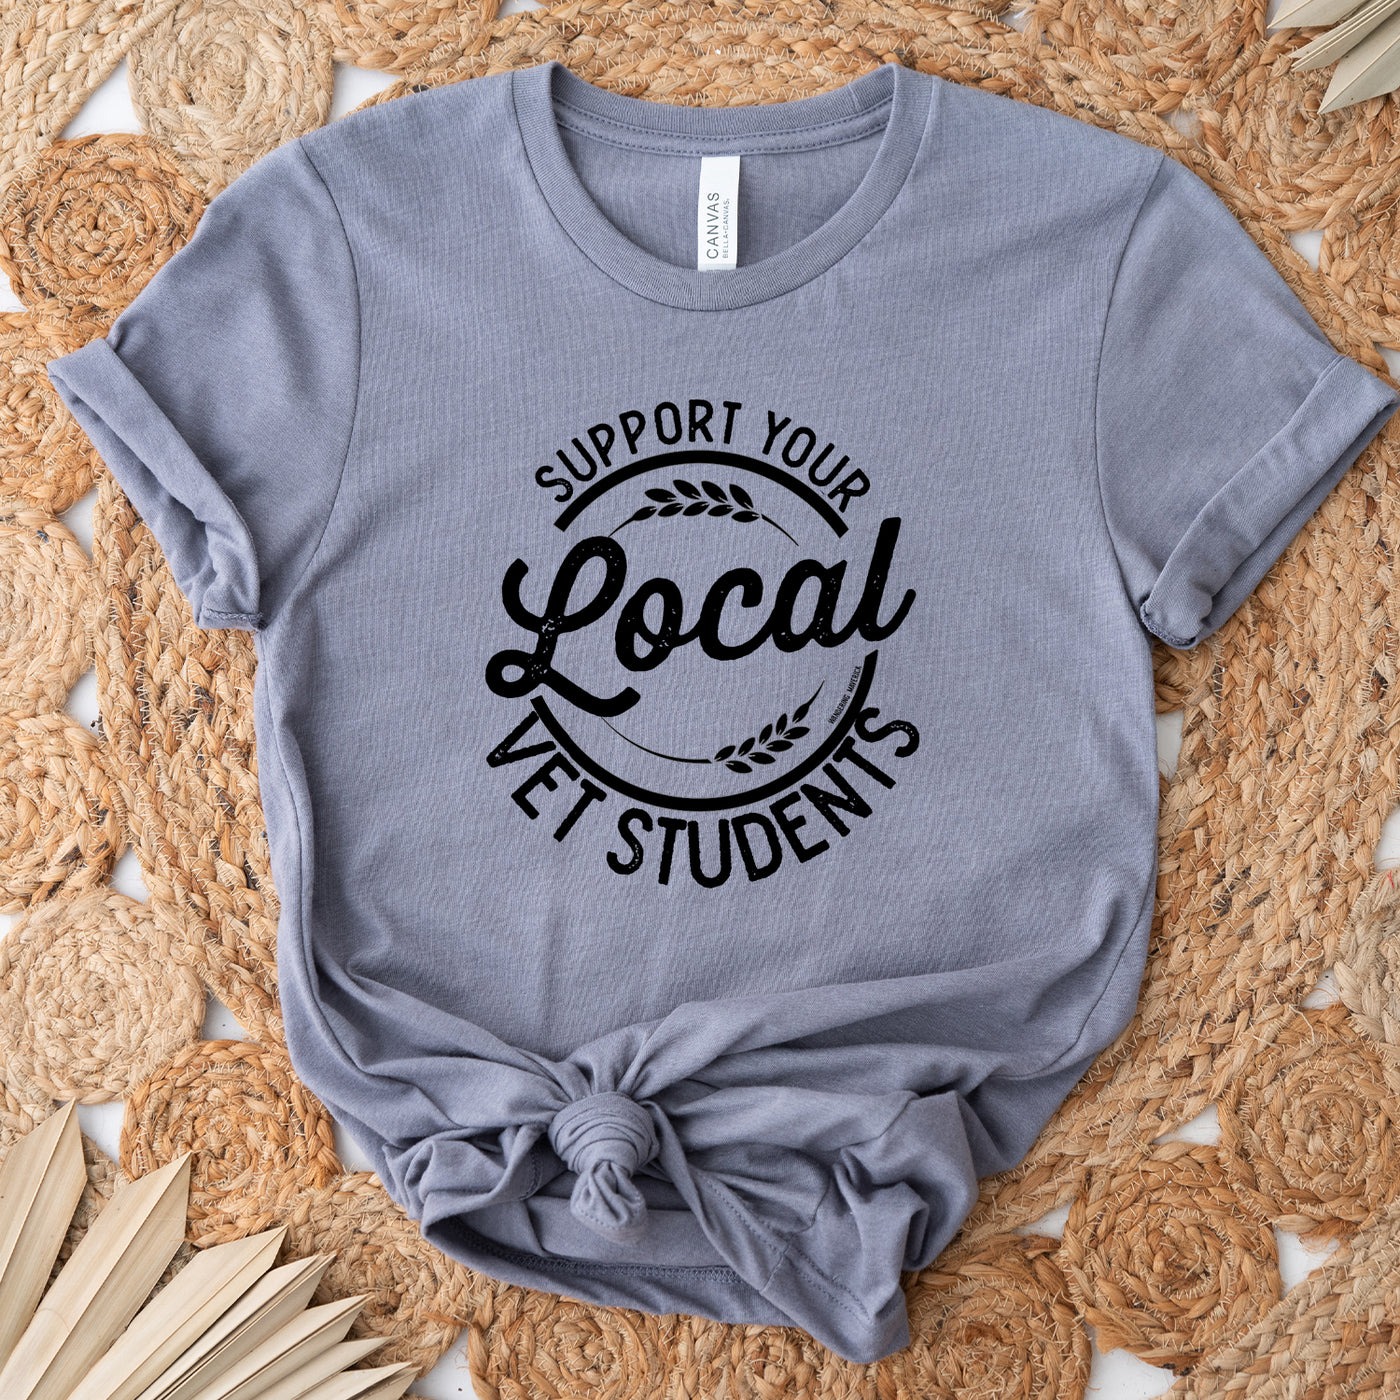 Support Your Local Vet Students T-Shirt (XS-4XL) - Multiple Colors!